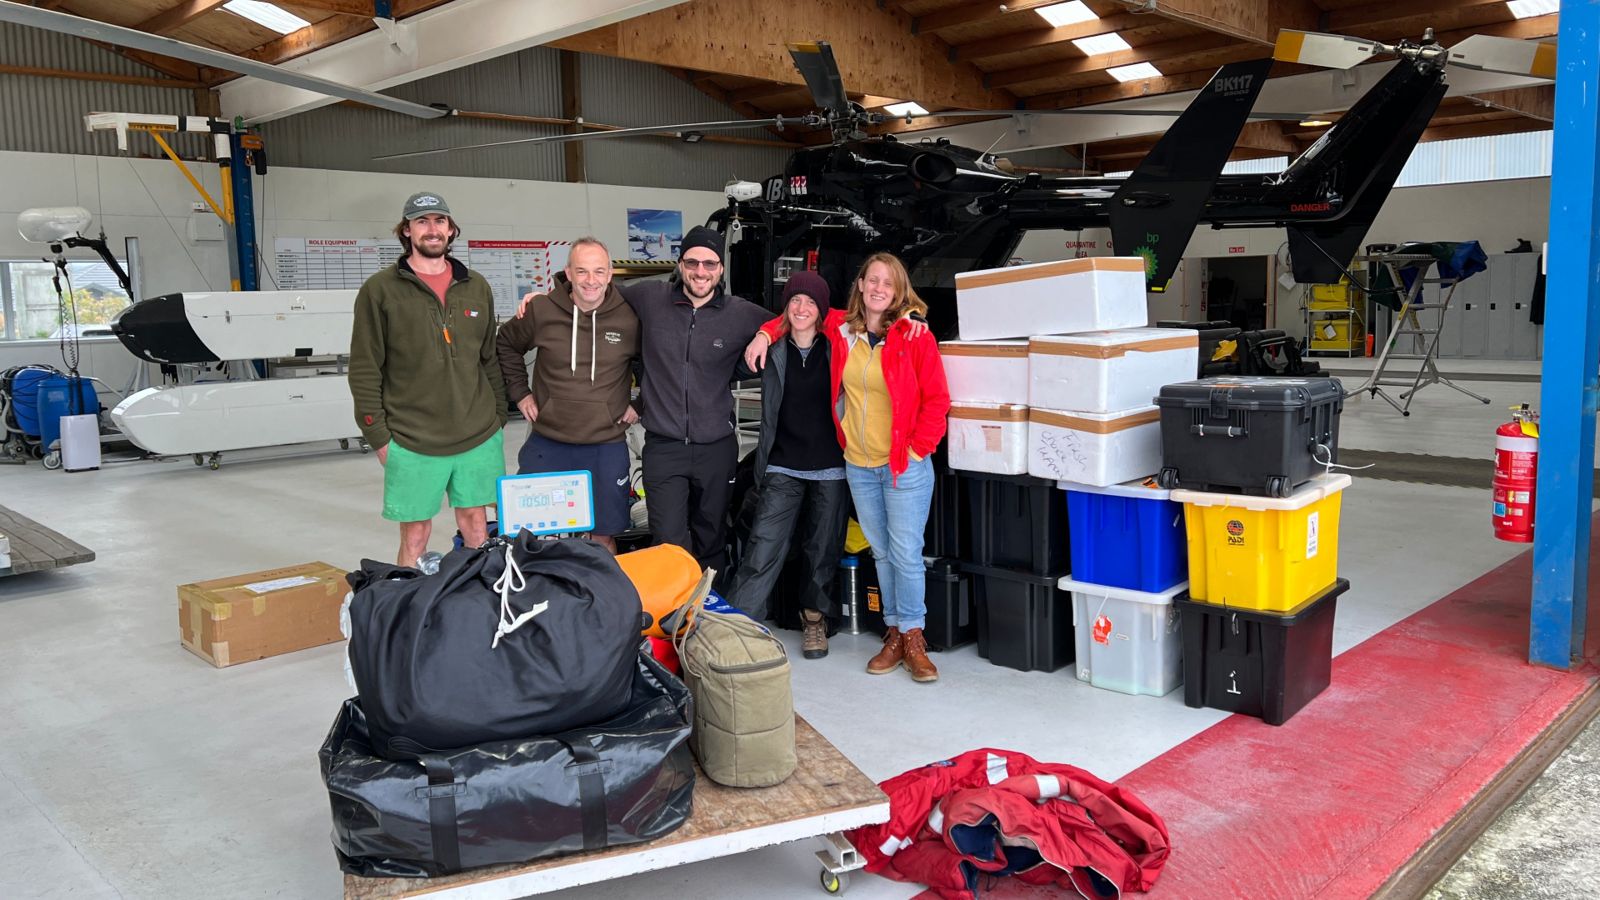 Research team with gear packed, waiting in helicopter hangar with helicopter in background.